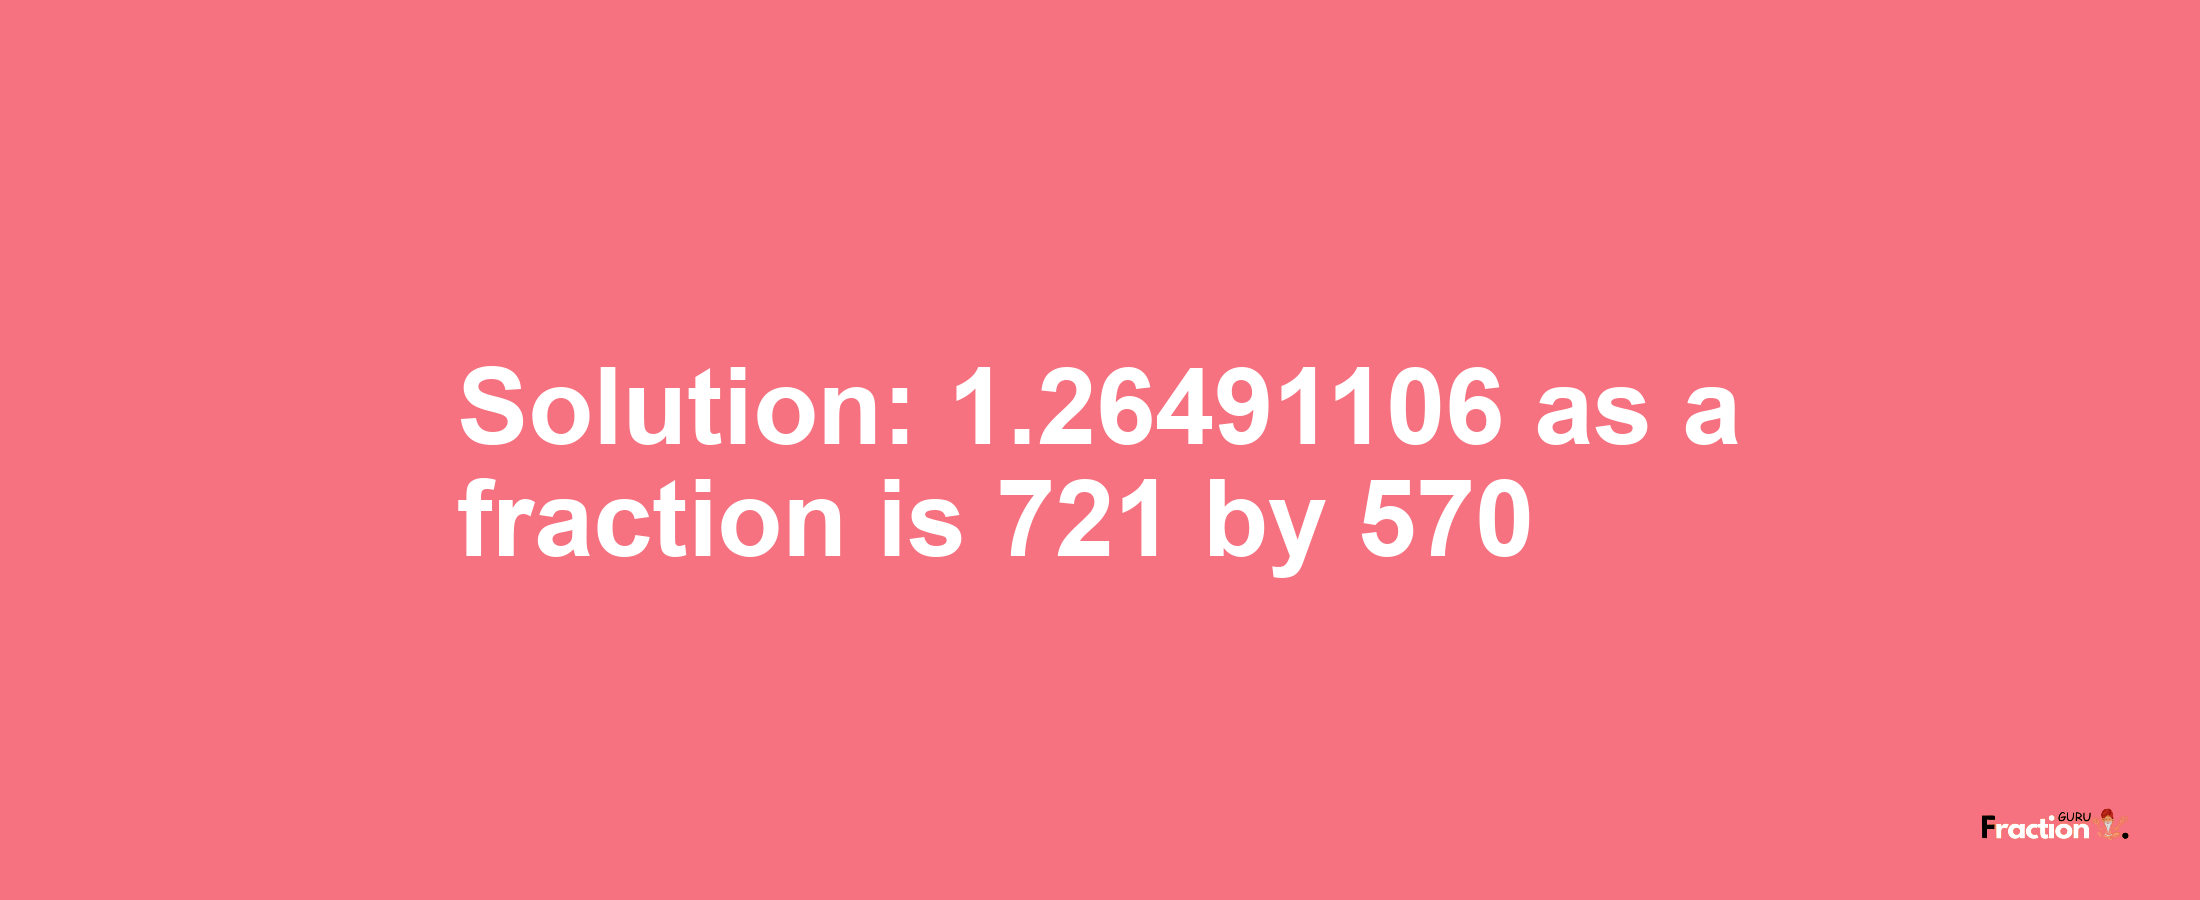 Solution:1.26491106 as a fraction is 721/570